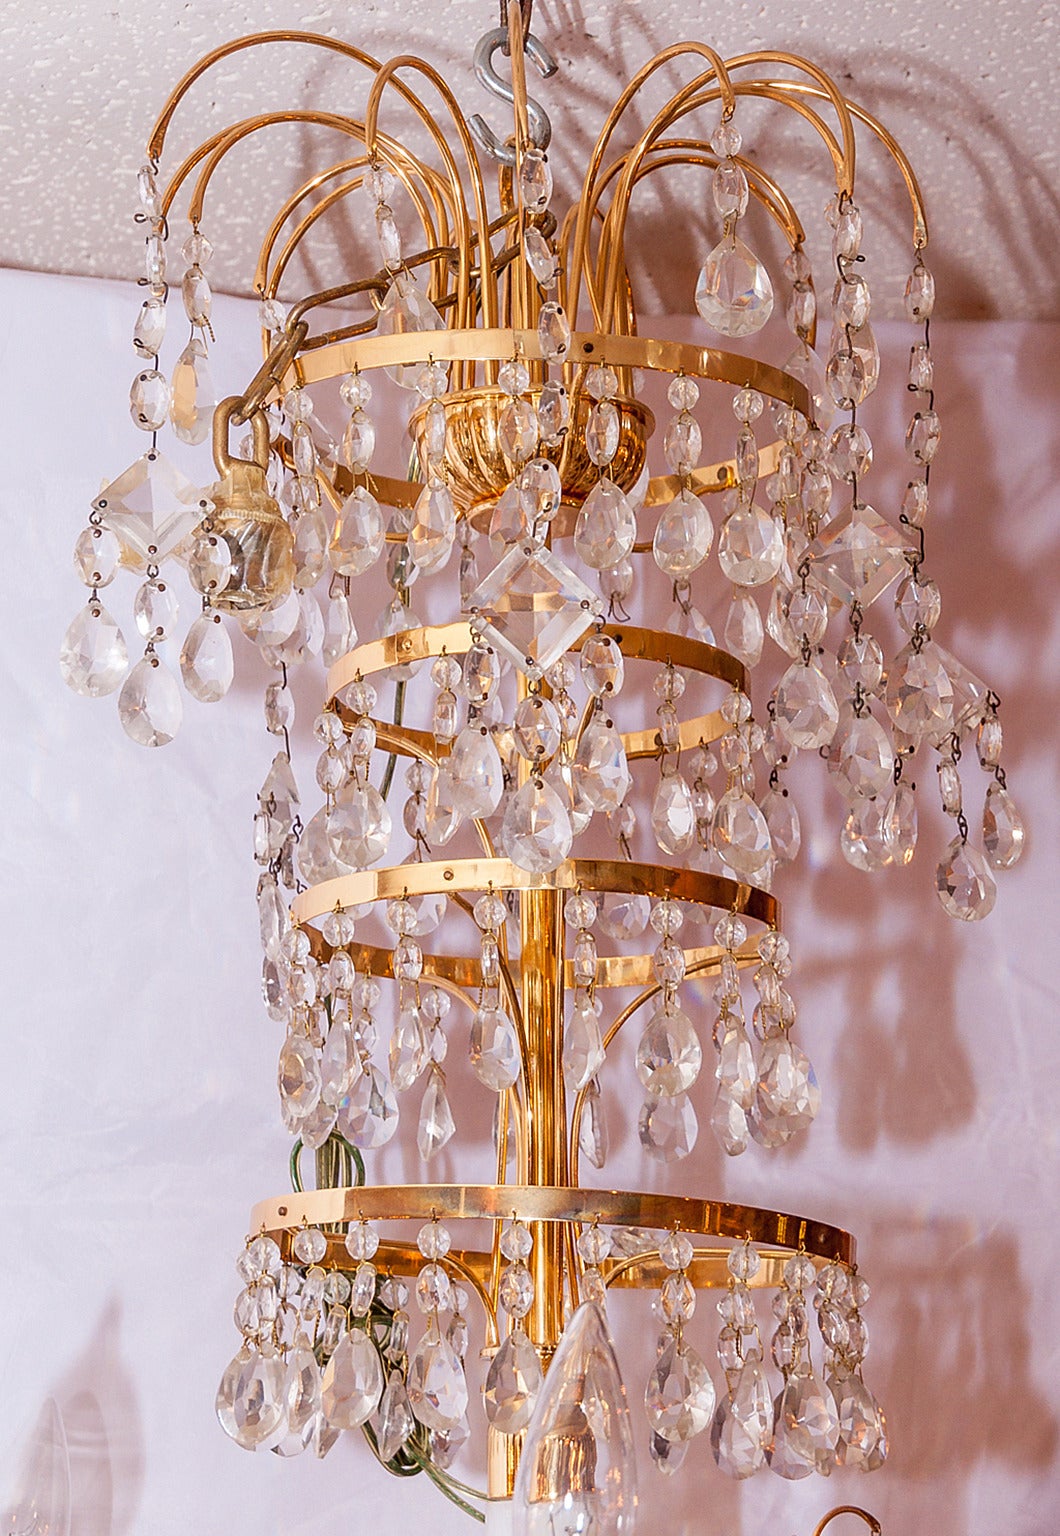 Russian style white opaline and bronze six-light chandelier.
Stock number: L421.